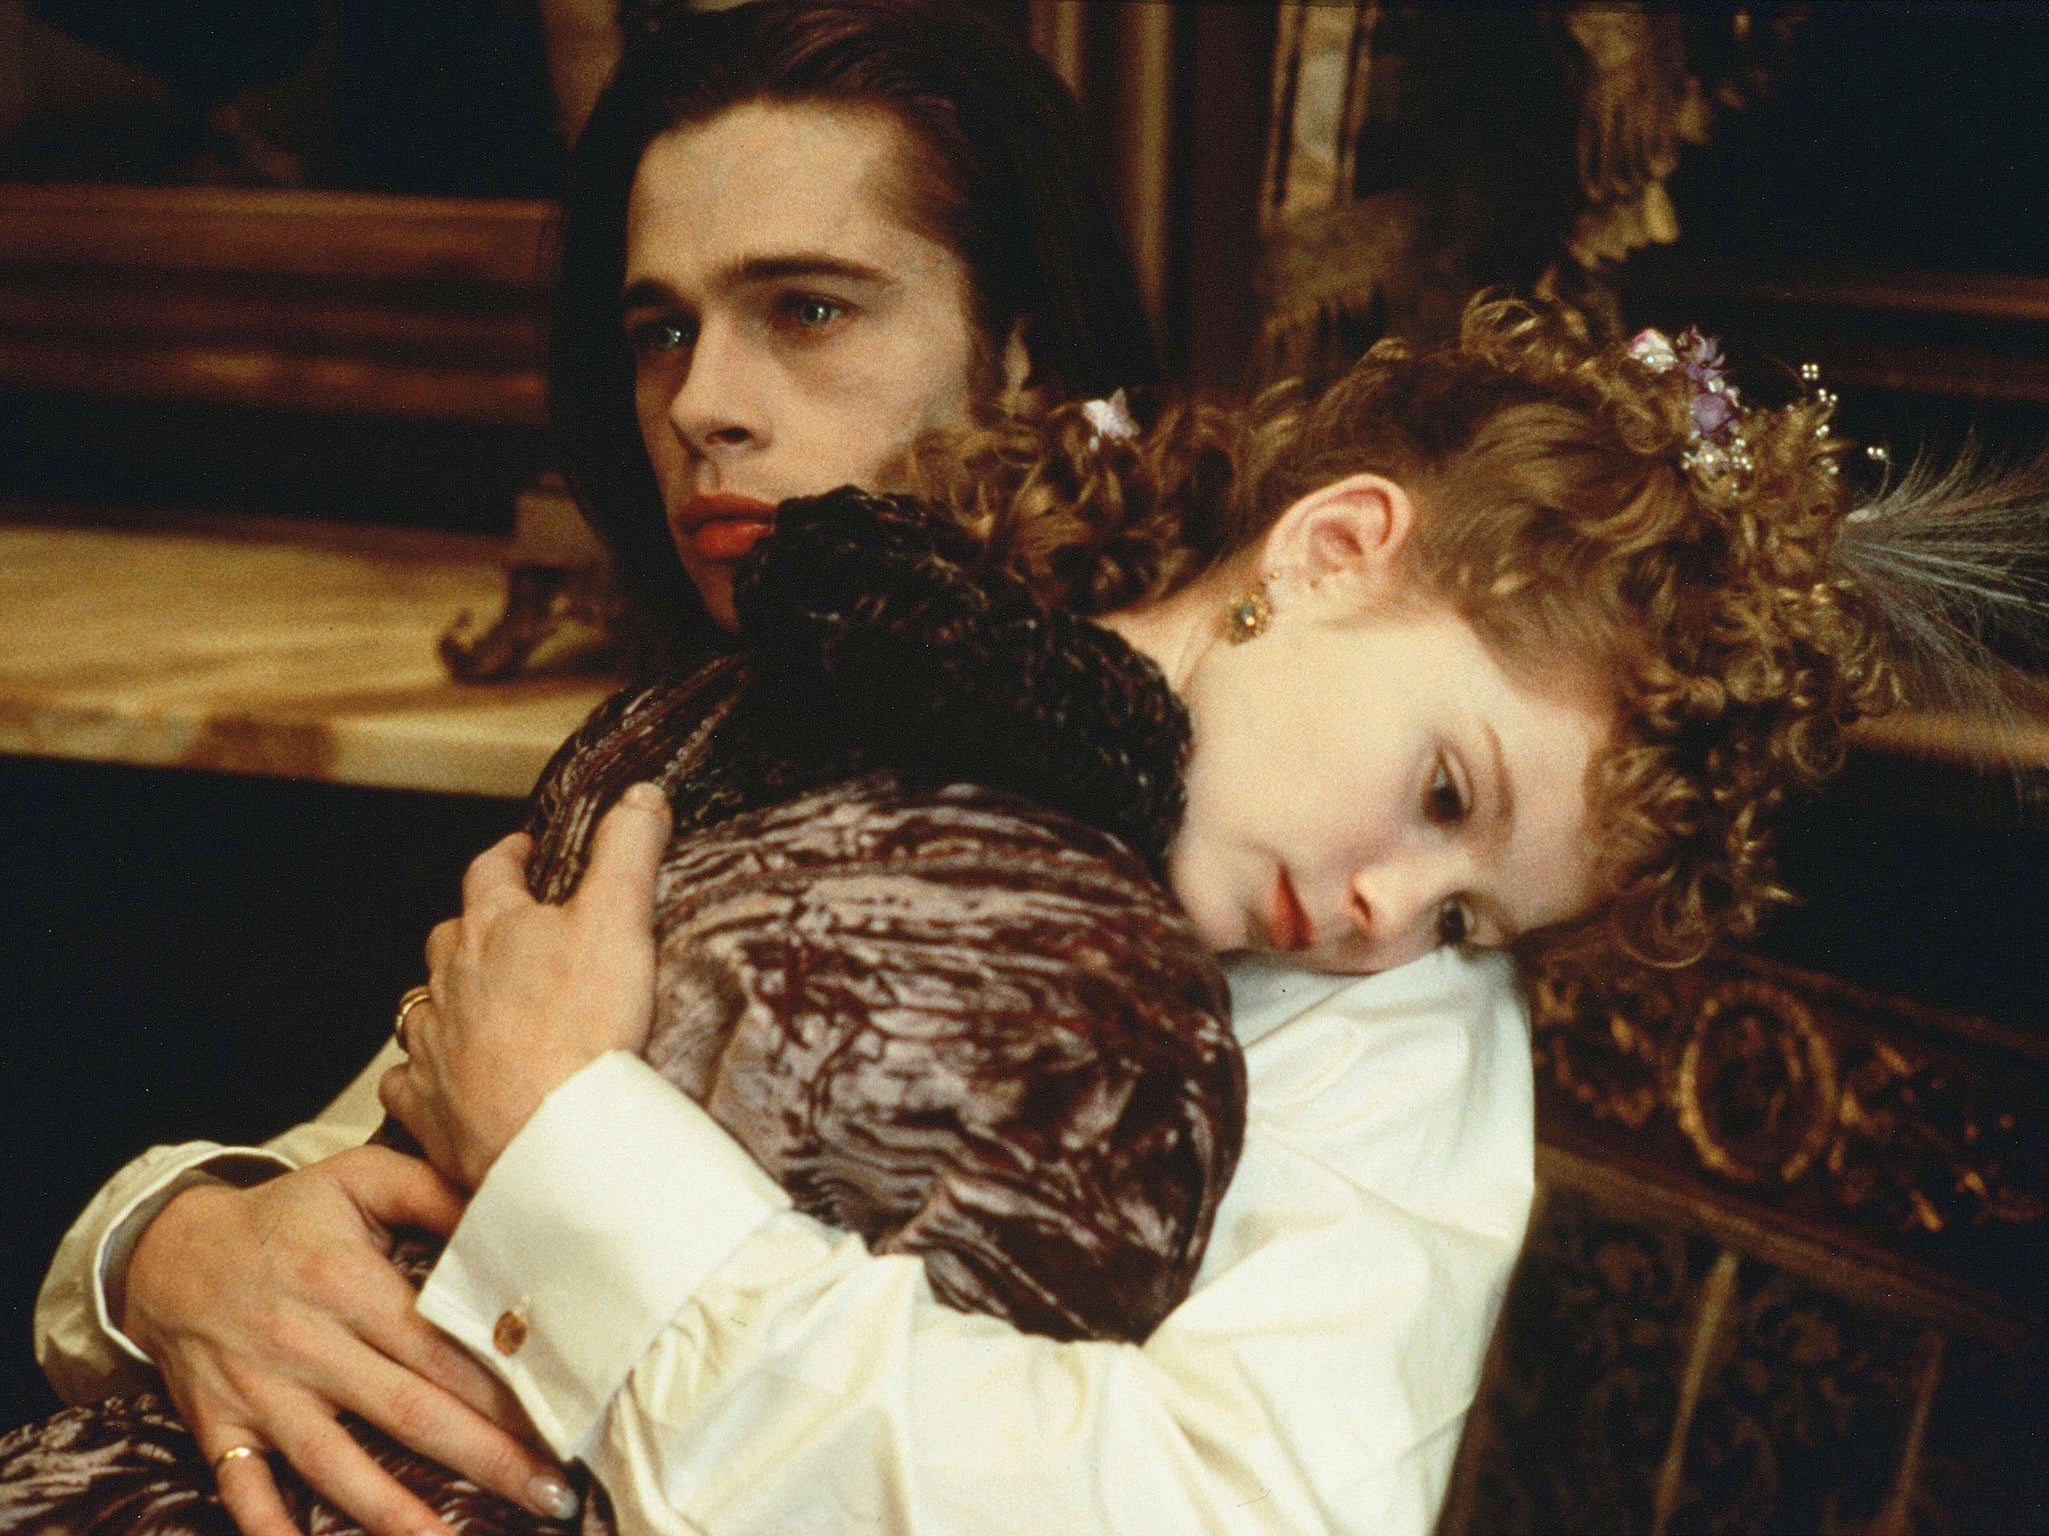 Brad Pitt and Kirsten Dunst in ‘Interview with the Vampire’